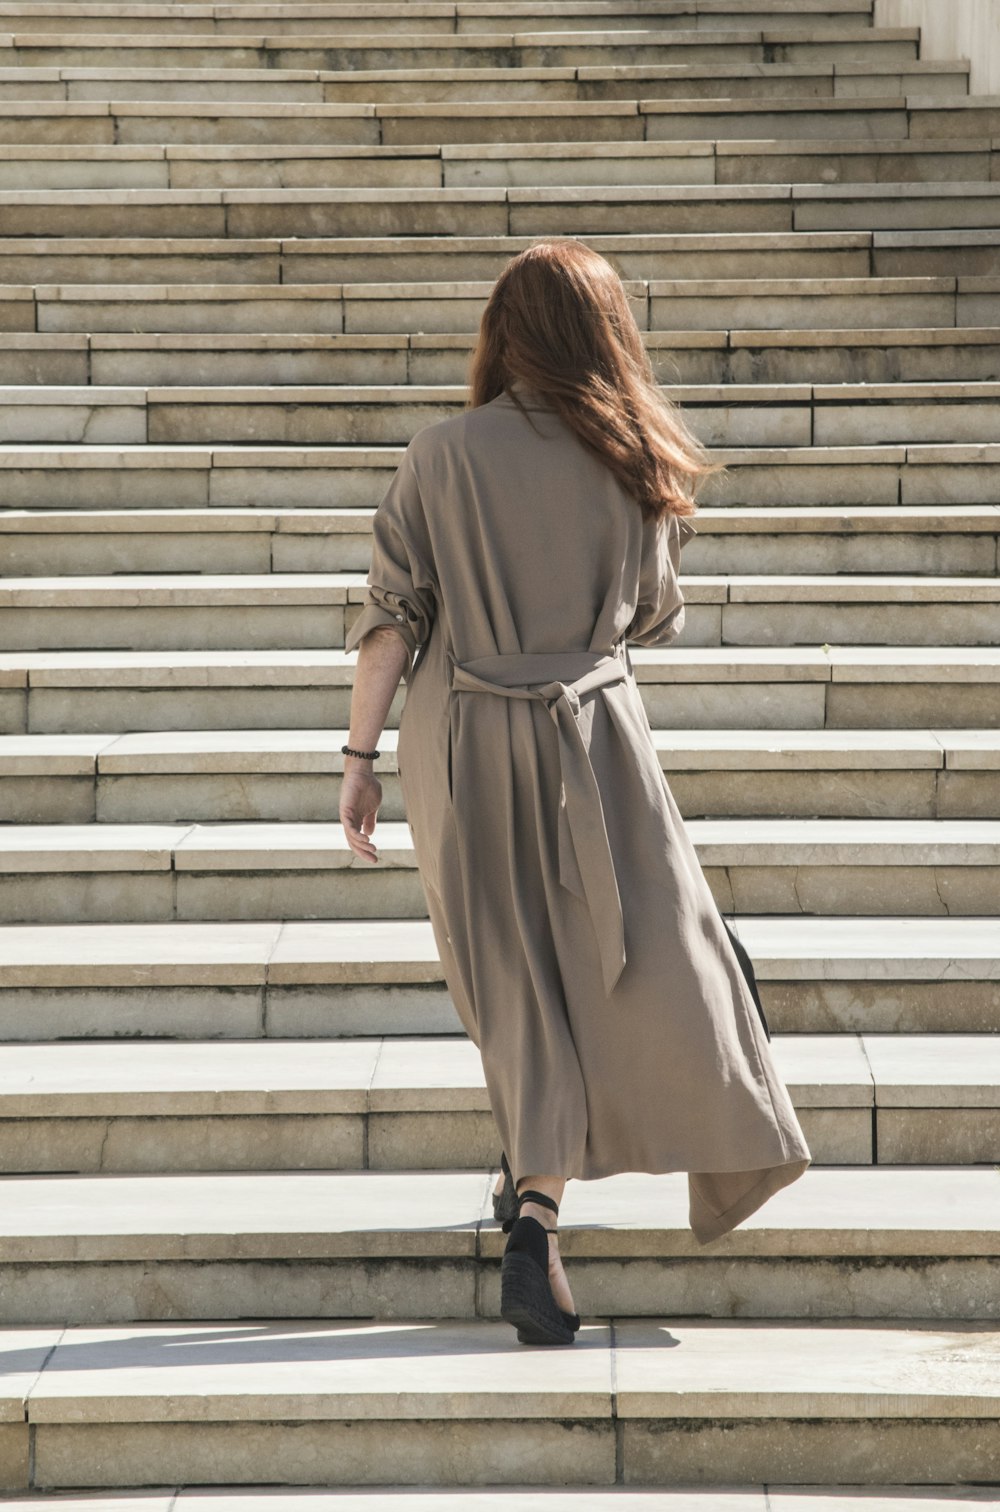 woman in brown long sleeve dress walking on white concrete stairs